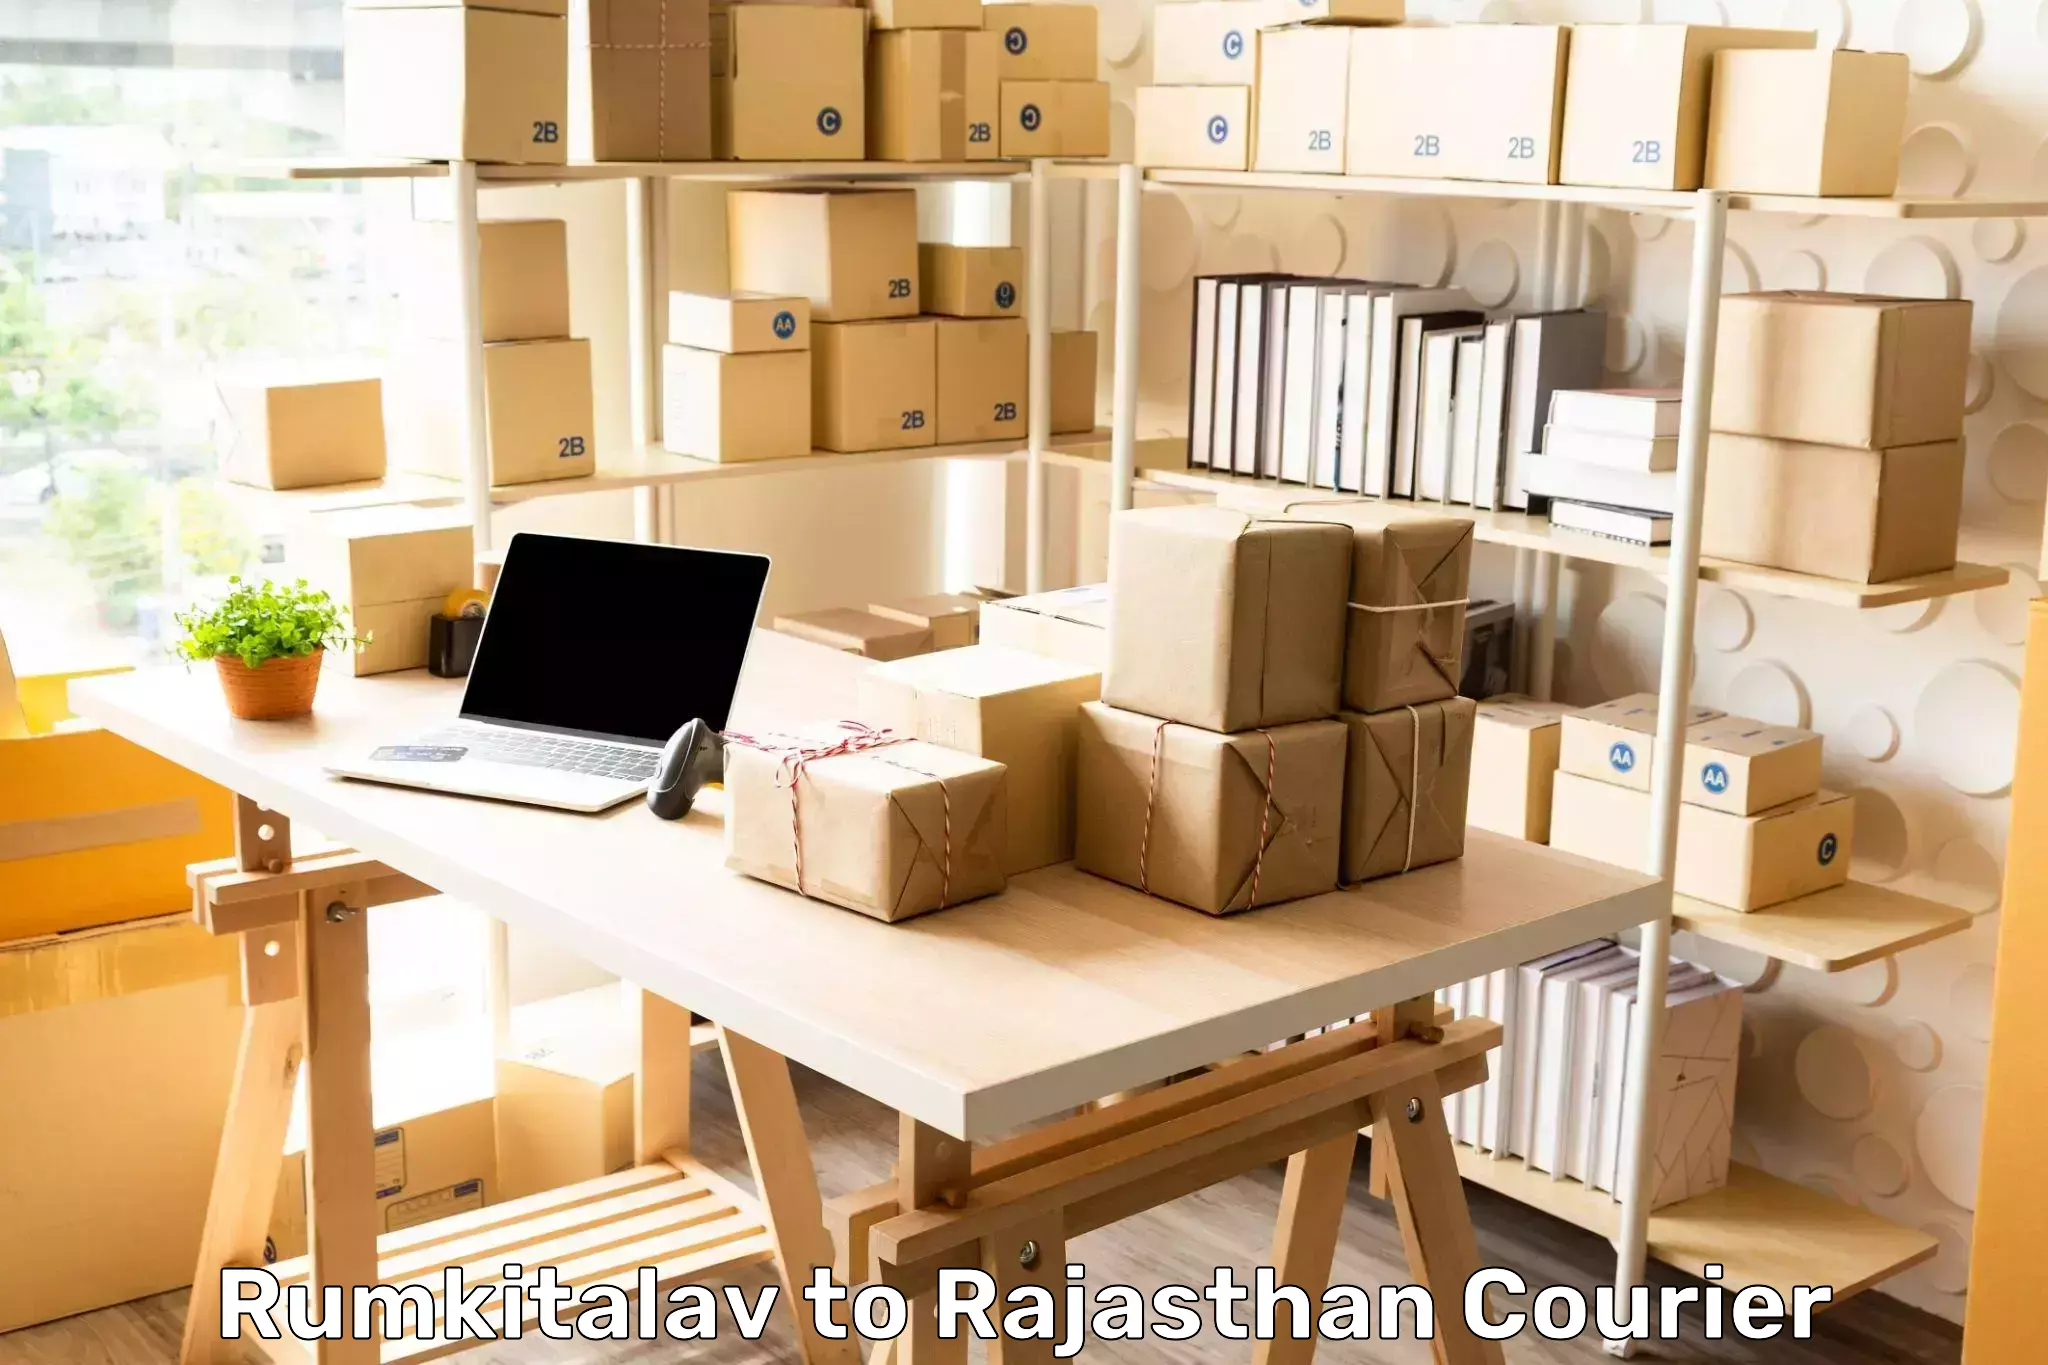 Courier dispatch services Rumkitalav to Yeswanthapur